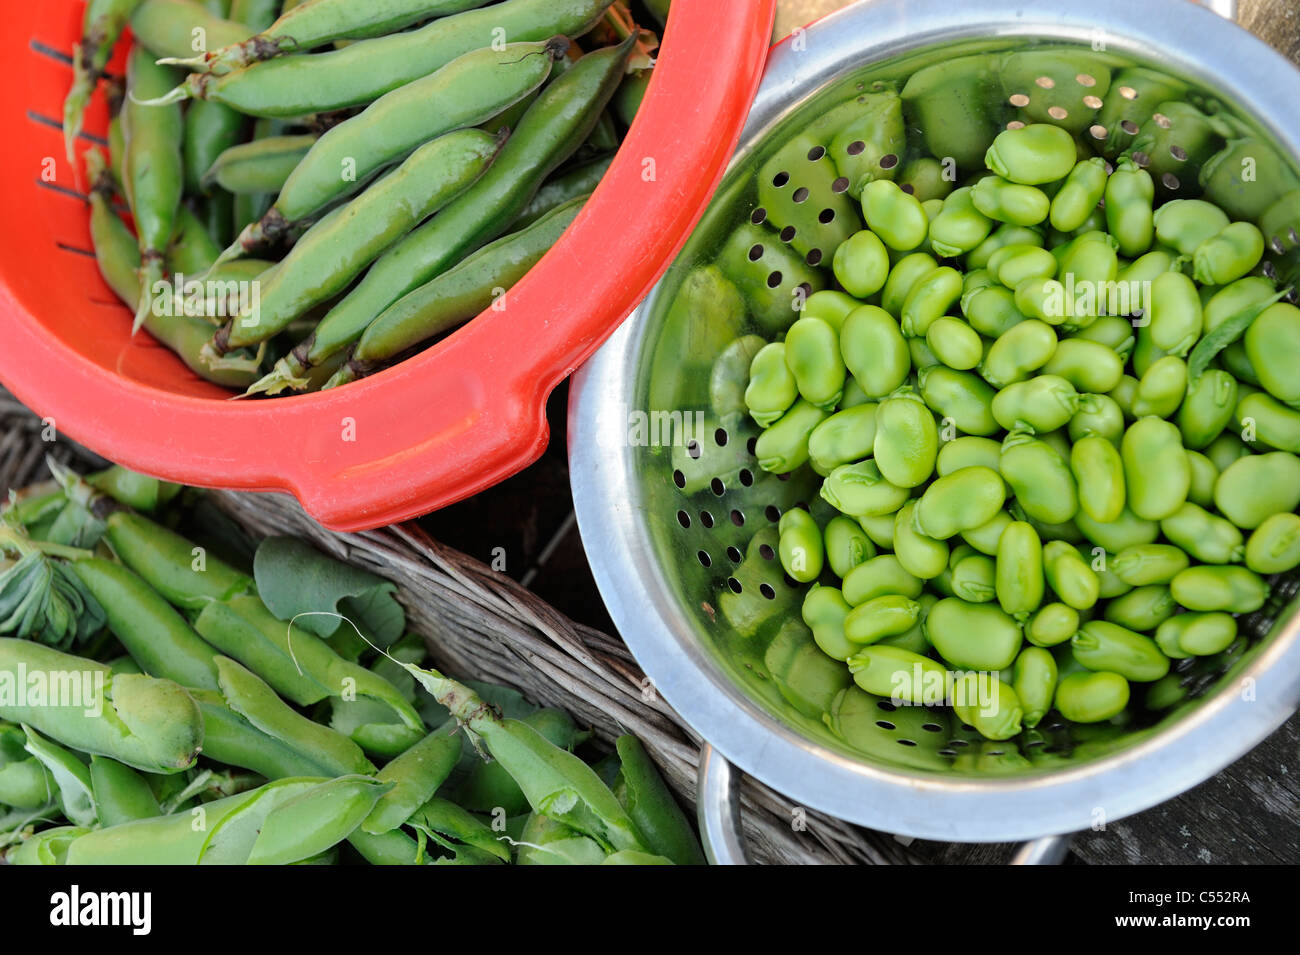 Home grown Broad beans, Showing beans, pods and empty husks, Norfolk, UK, July Stock Photo